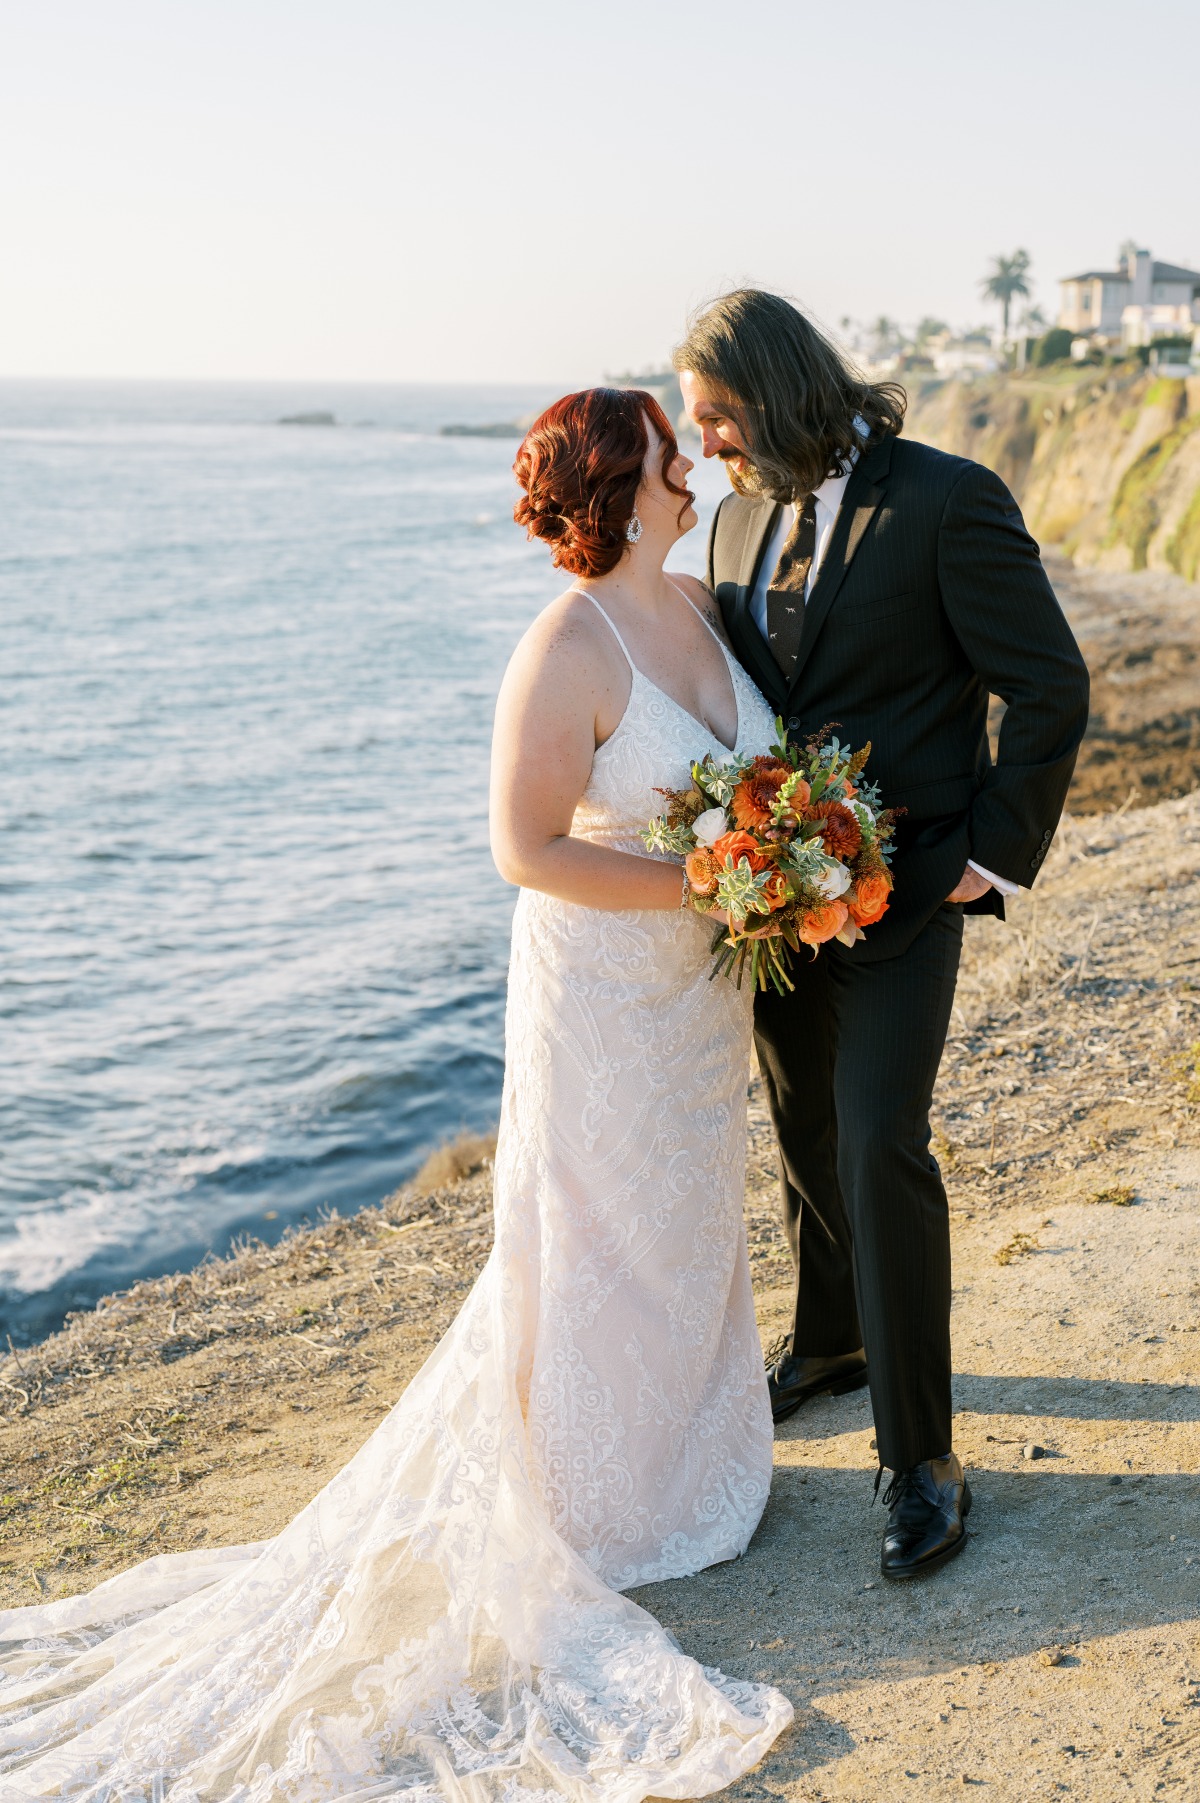 This Chic Micro Wedding On The San Diego Coast Was Only 15K